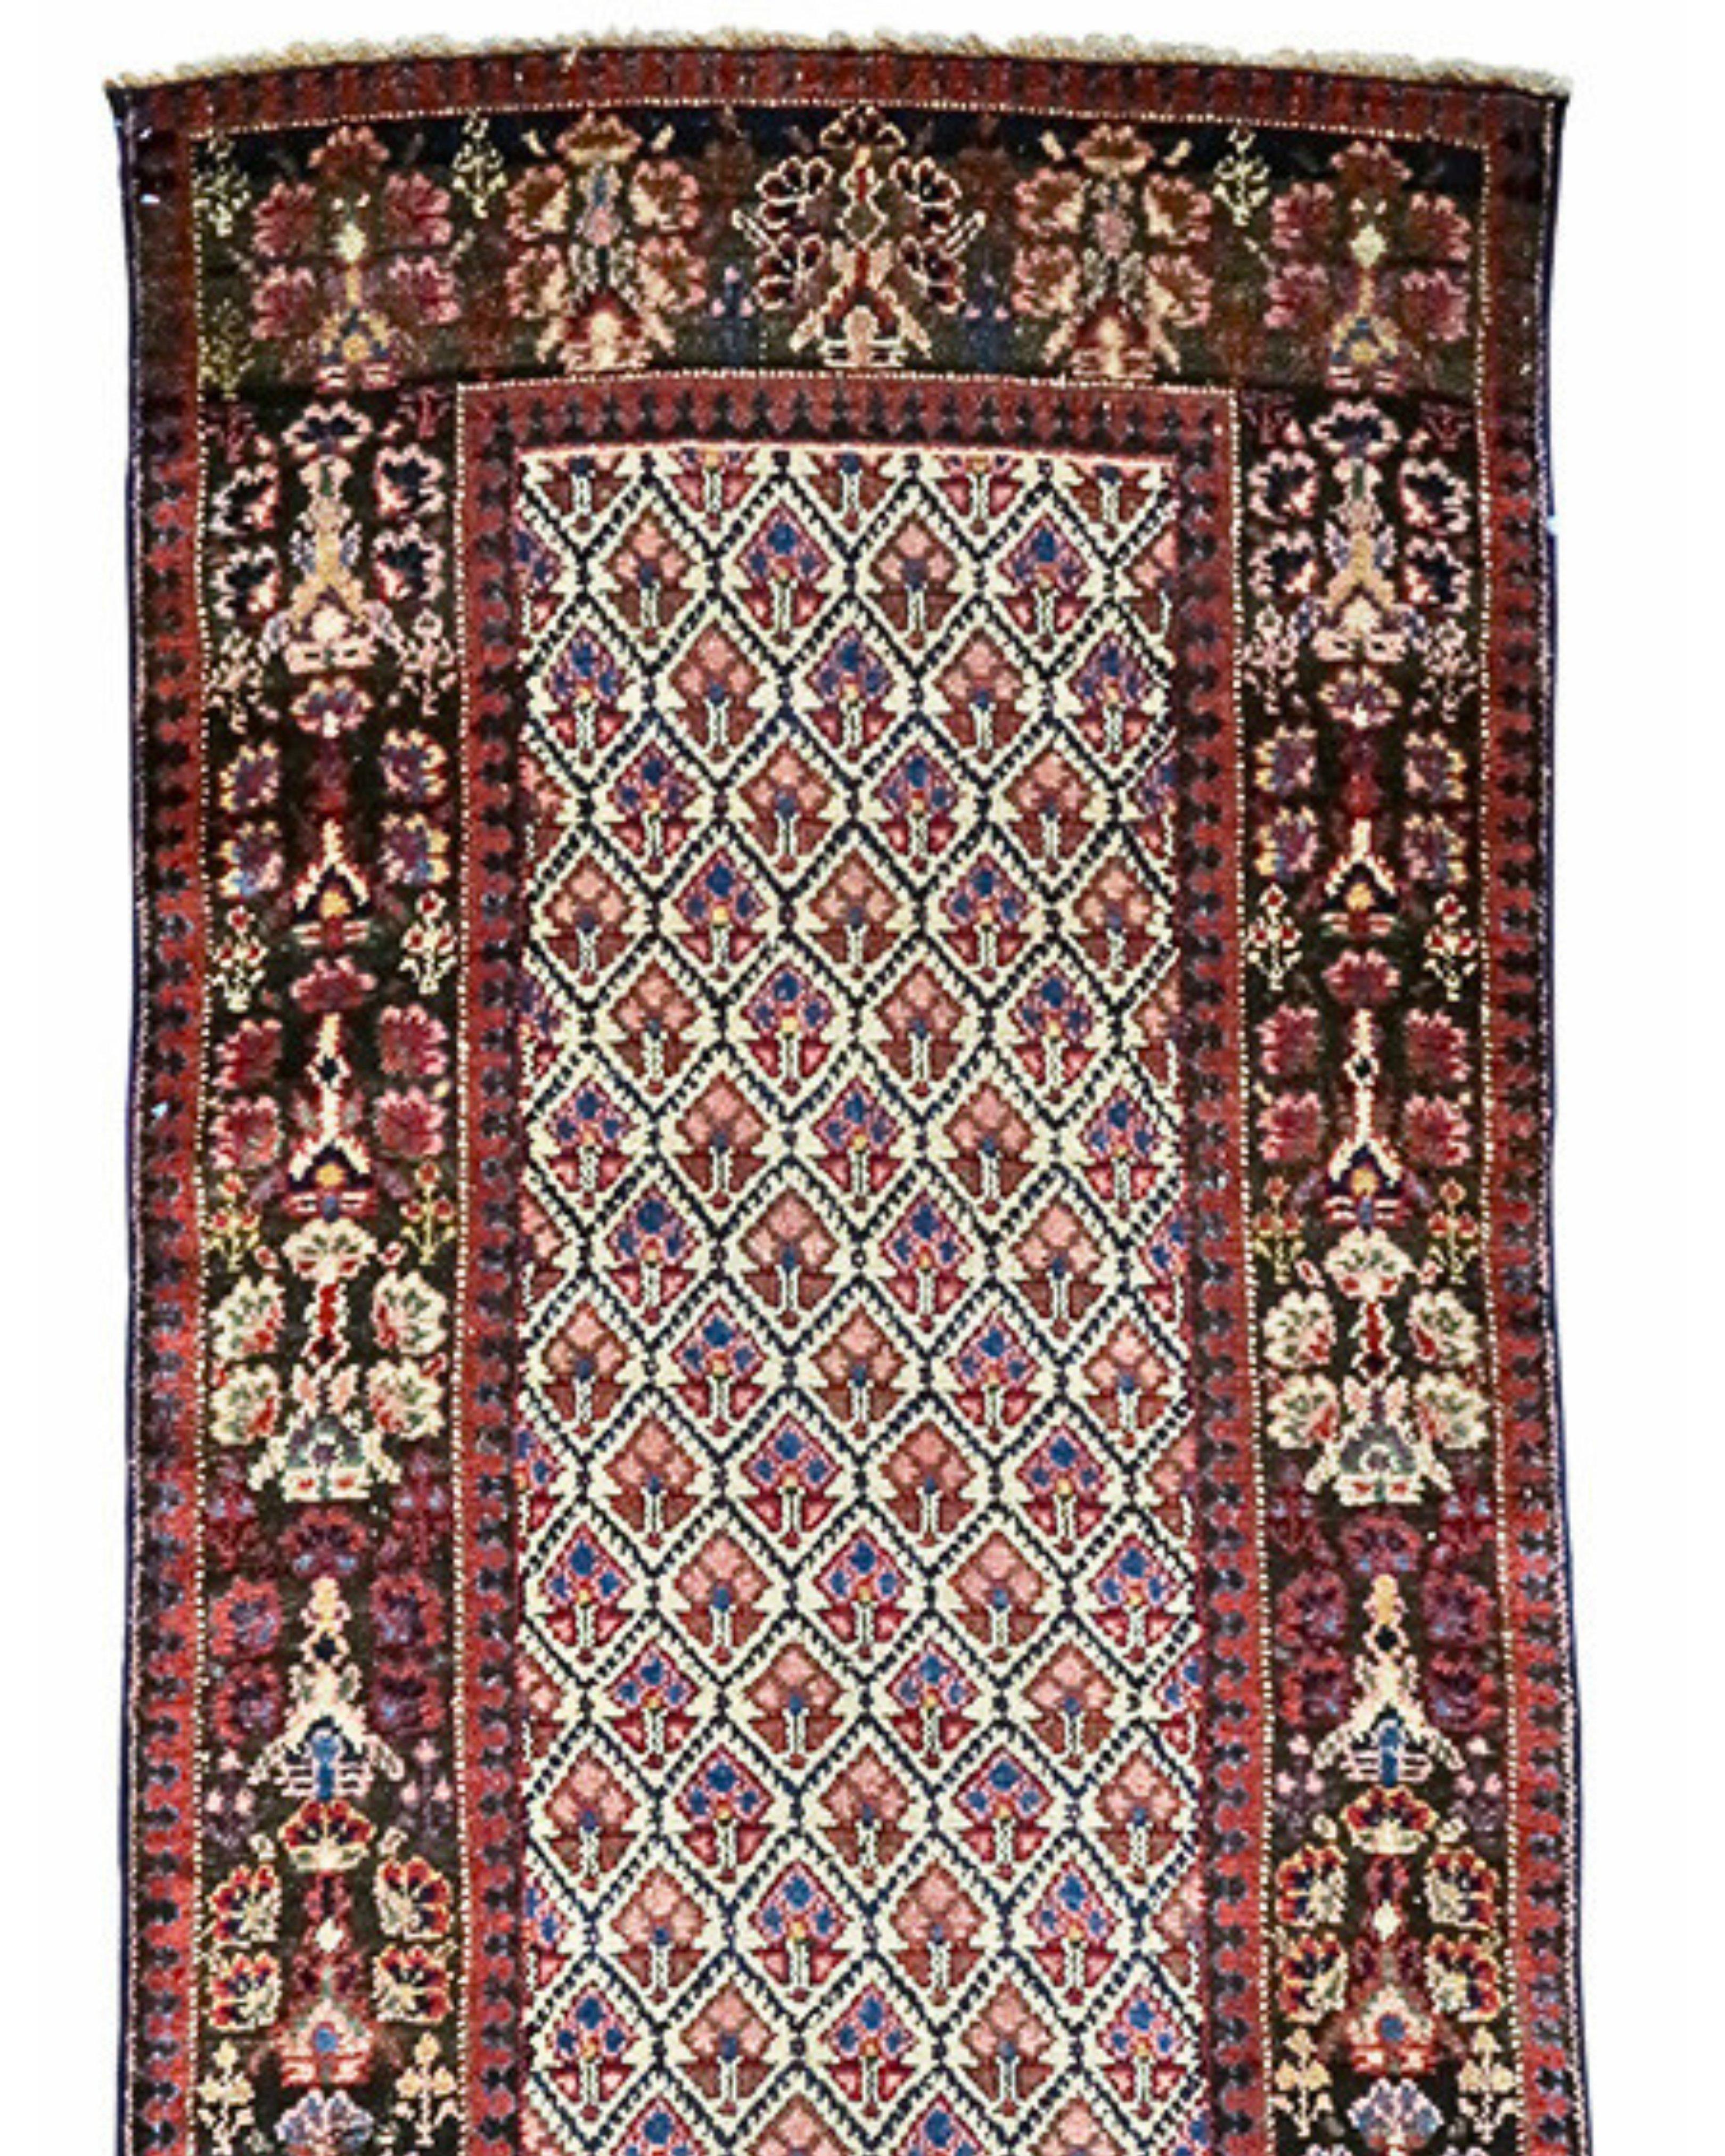 Antique Kurdish Runner Rug, 19th Century In Excellent Condition For Sale In San Francisco, CA